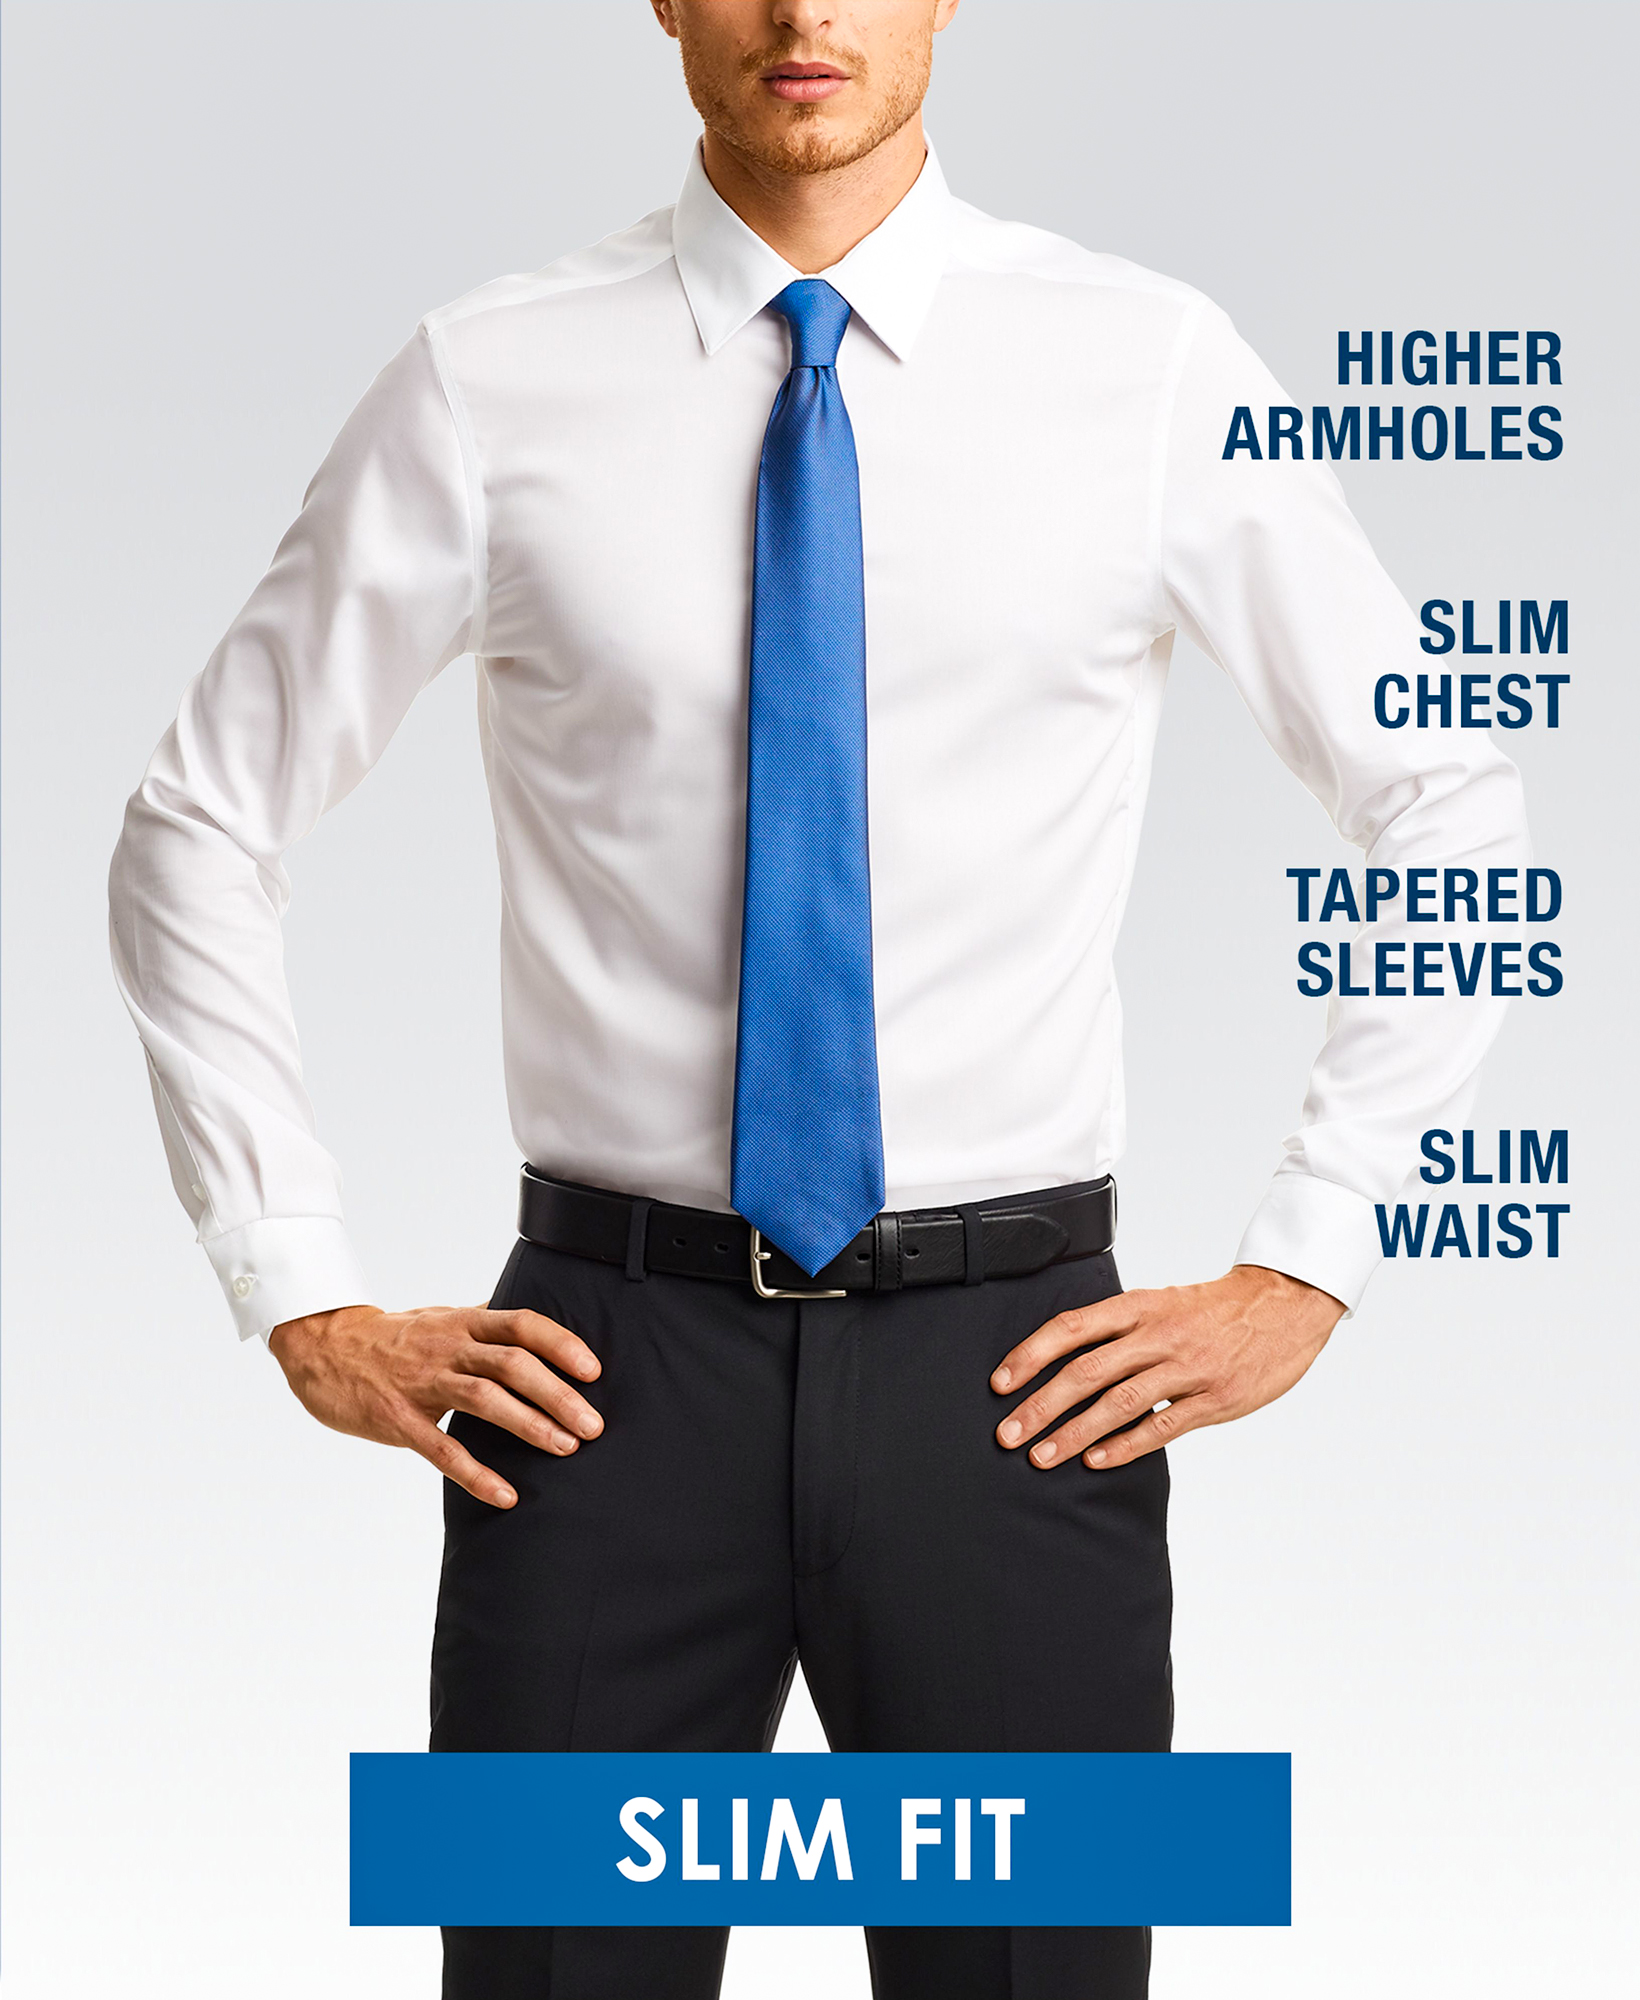 Men's Dress Shirt Styles Types: Ultimate Guide Suits Expert | vlr.eng.br